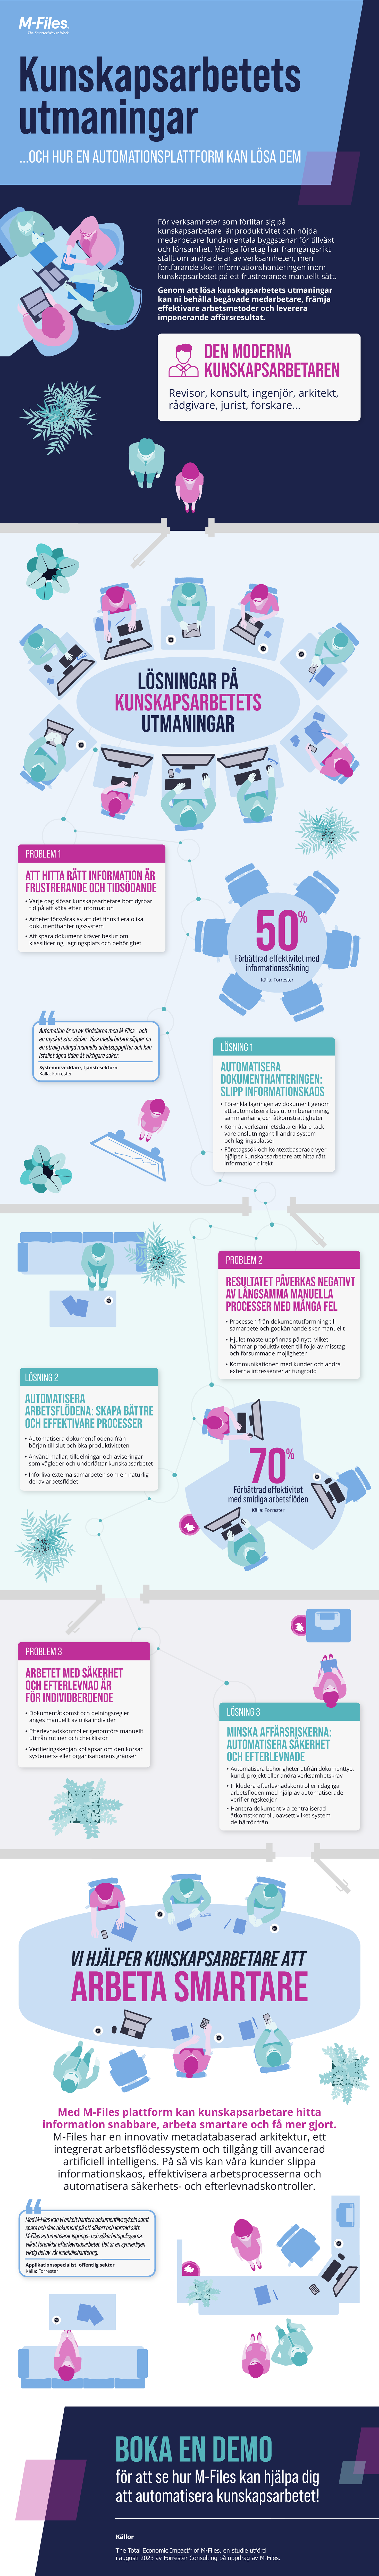 Infographic - Knowledge Work Automation - SE (ID 438471)